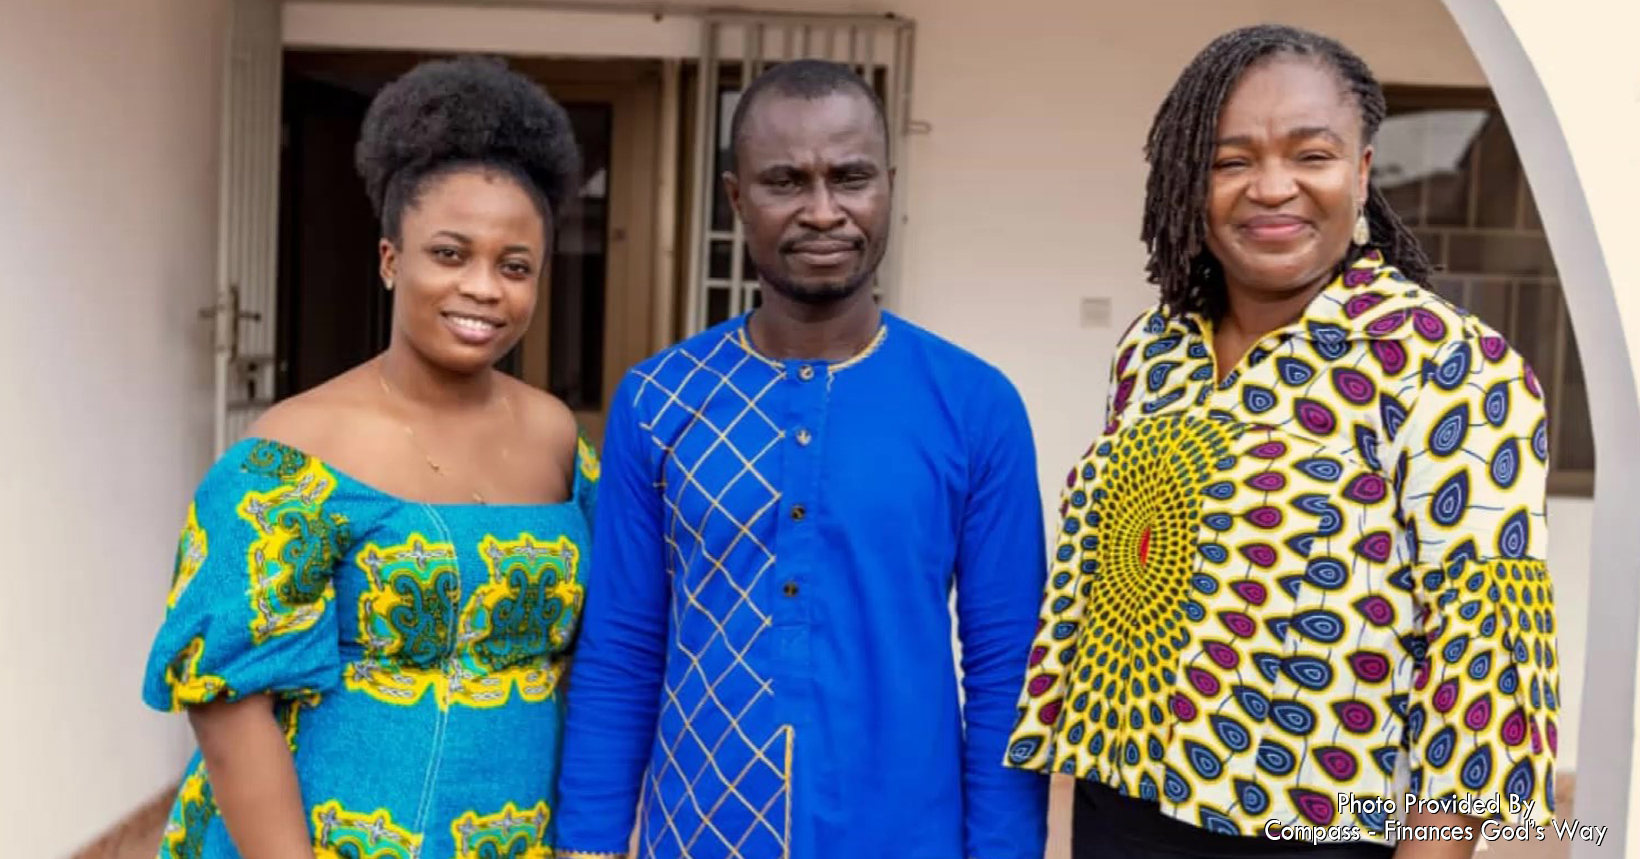 Starting from the right is Mrs. Ivy Anan Mawuko, Apostle Dr. Opoku Nyarko, and Mr Csipina Bonney who all work for Compass Ghana.